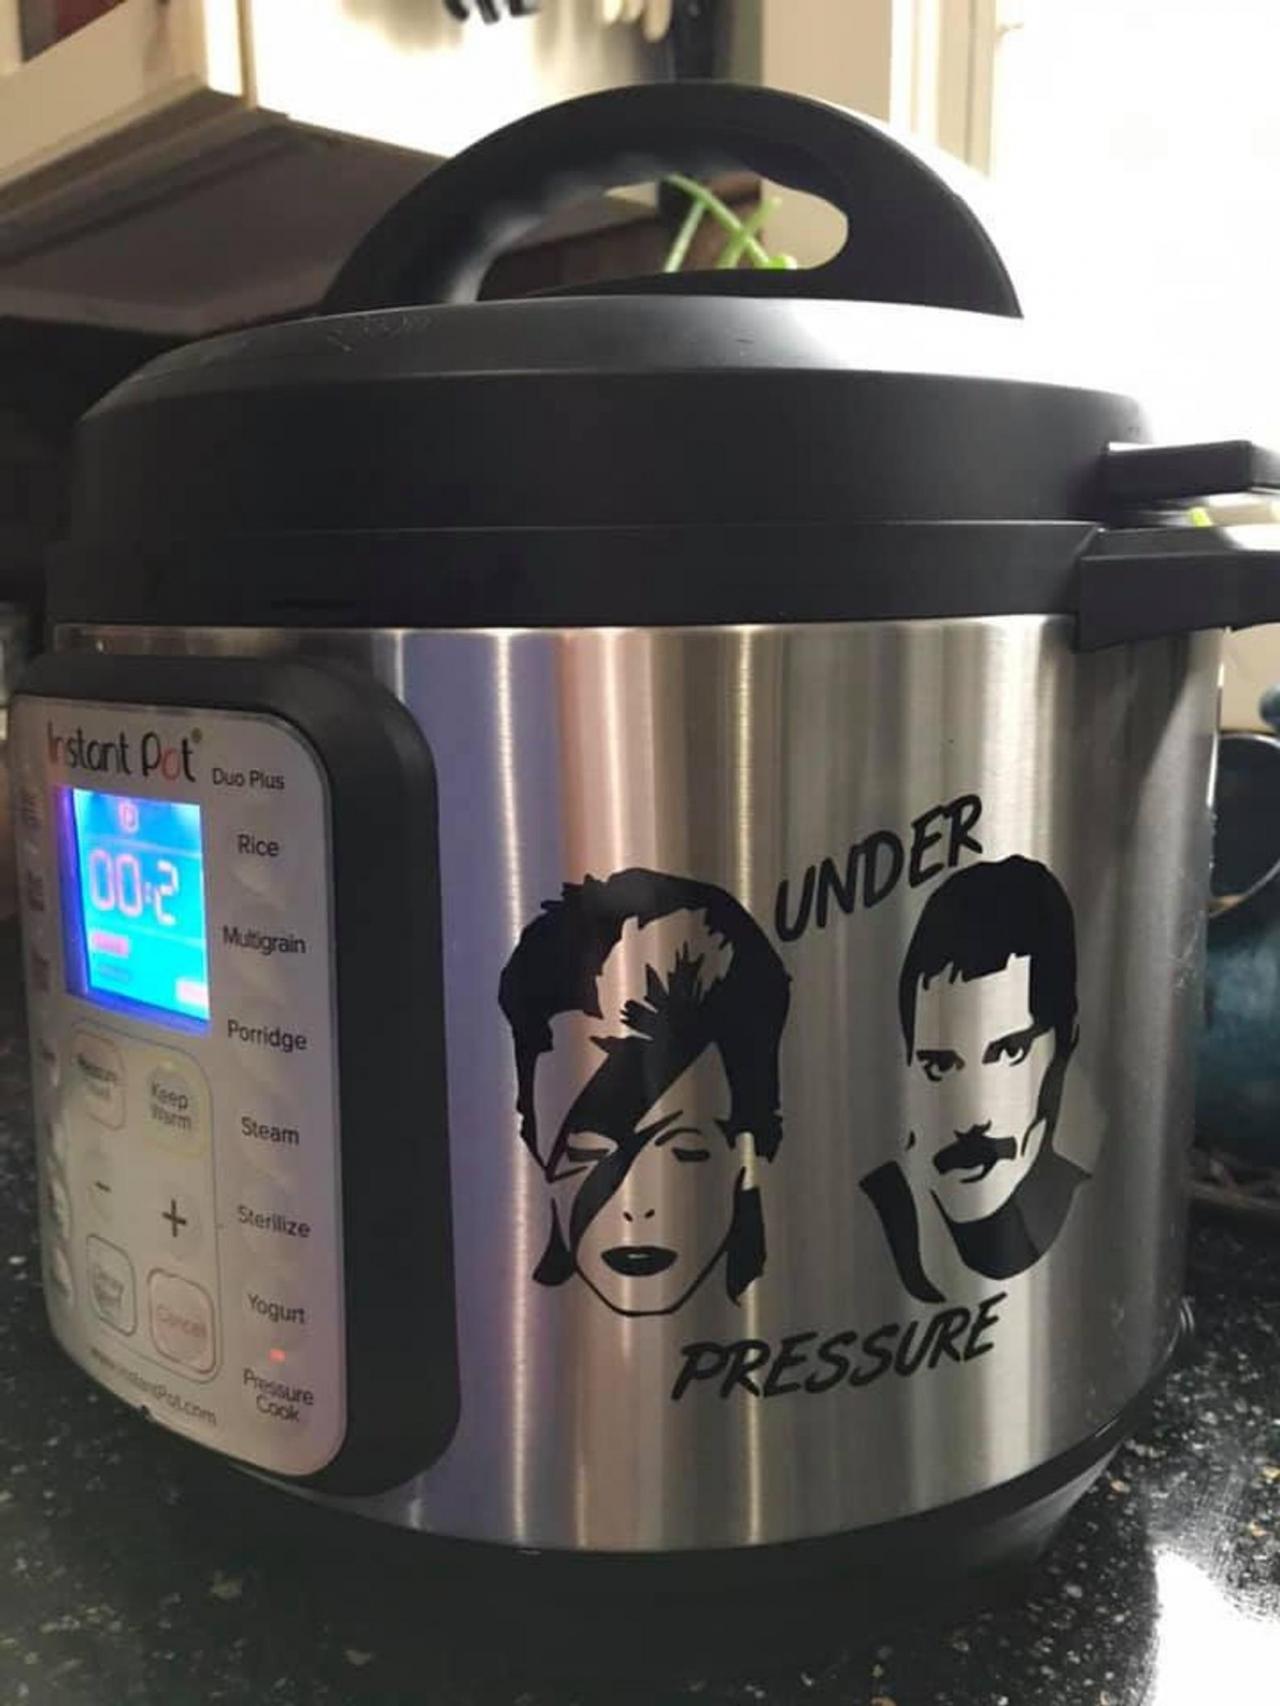 Instant Pot Decal / Under Pressure Decal / Crockpot Decal